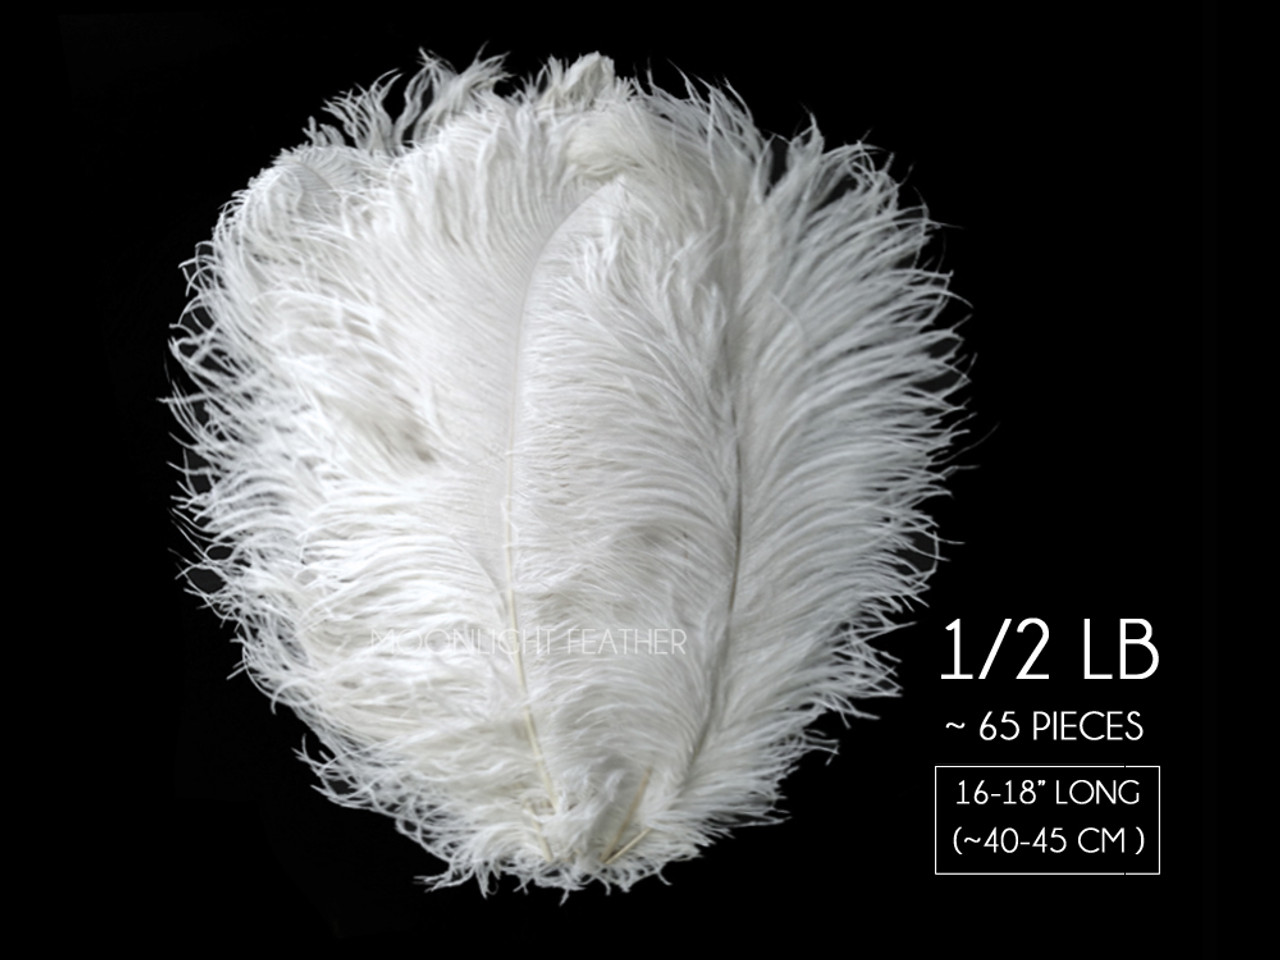 1/2 Lb. - 18-24 Cream Large Ostrich Wing Plume Wholesale Feathers (Bulk)  Wedding Centerpiece Party Supply | Moonlight Feather